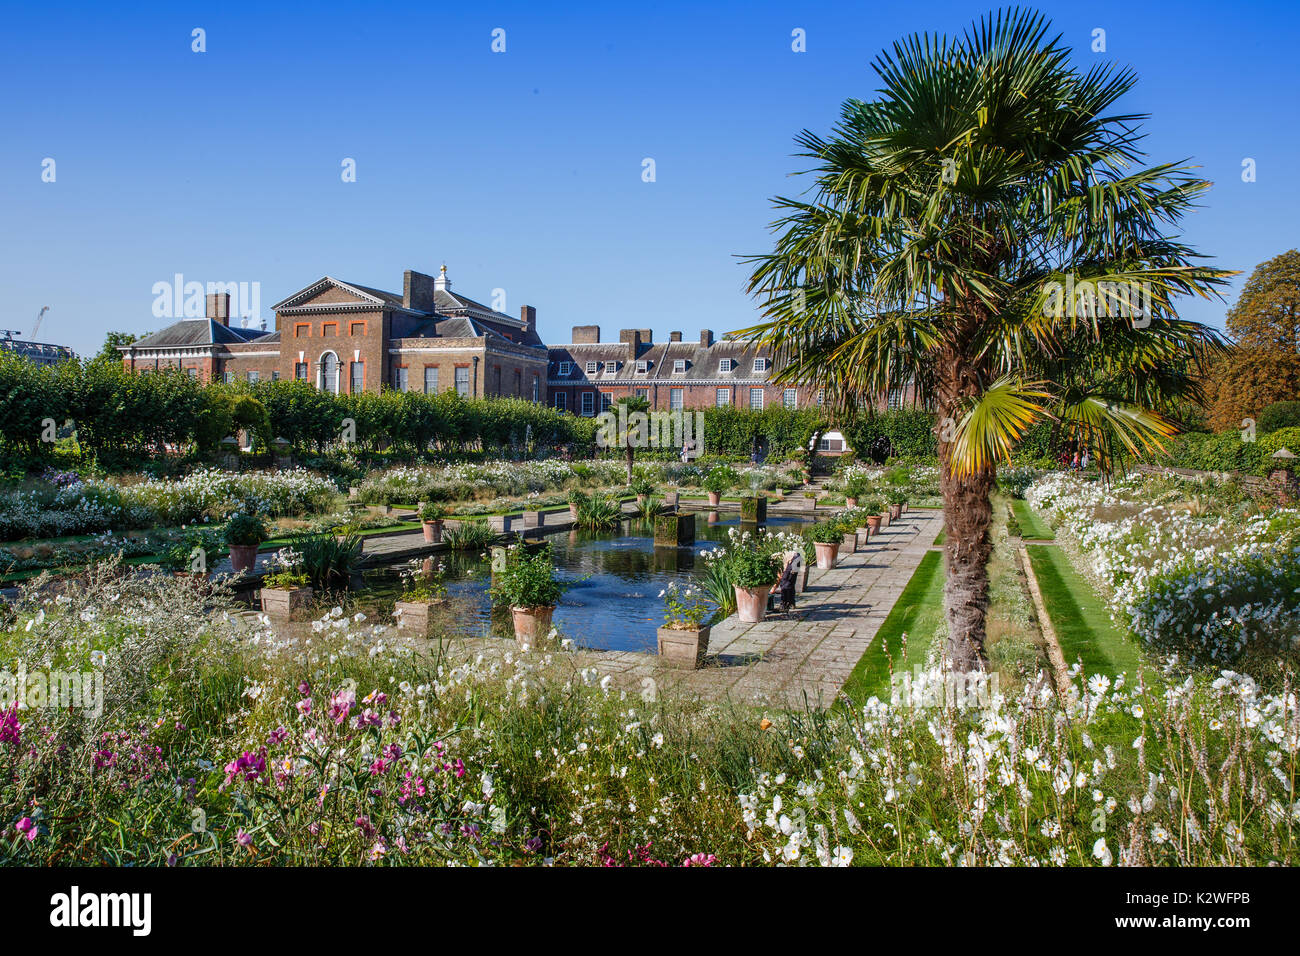 The White Garden in the grounds of Kensington Palace, London, created by the Royal gardeners in memory of Diana, Princess of Wales. Stock Photo